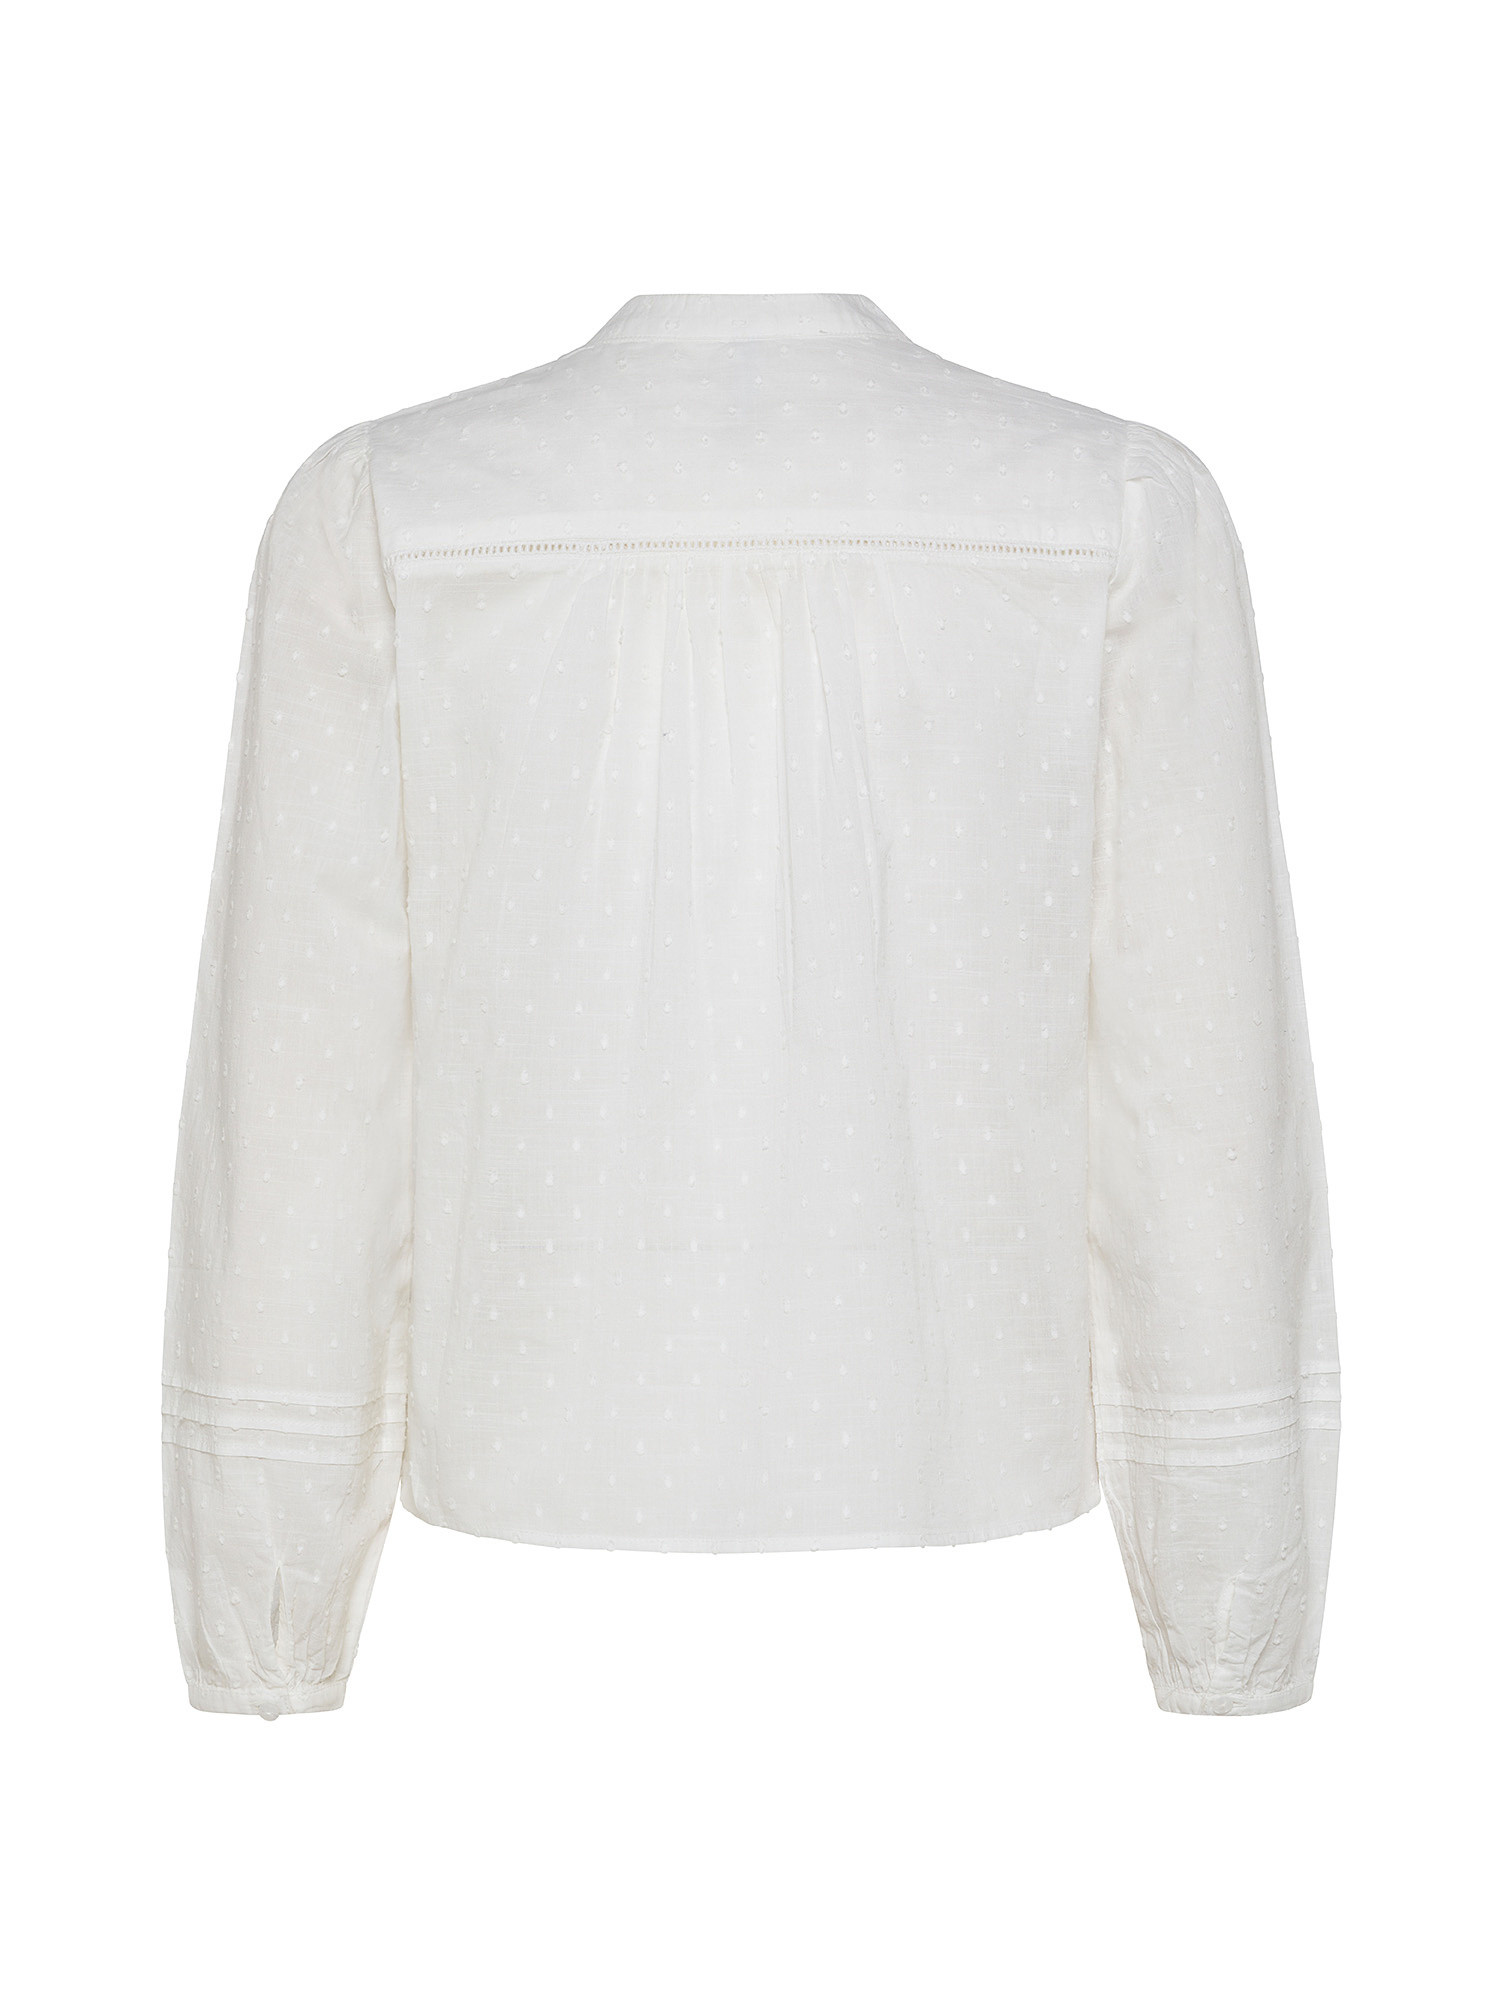 Pepe Jeans -  Blusa in cotone con ricami, Bianco, large image number 1